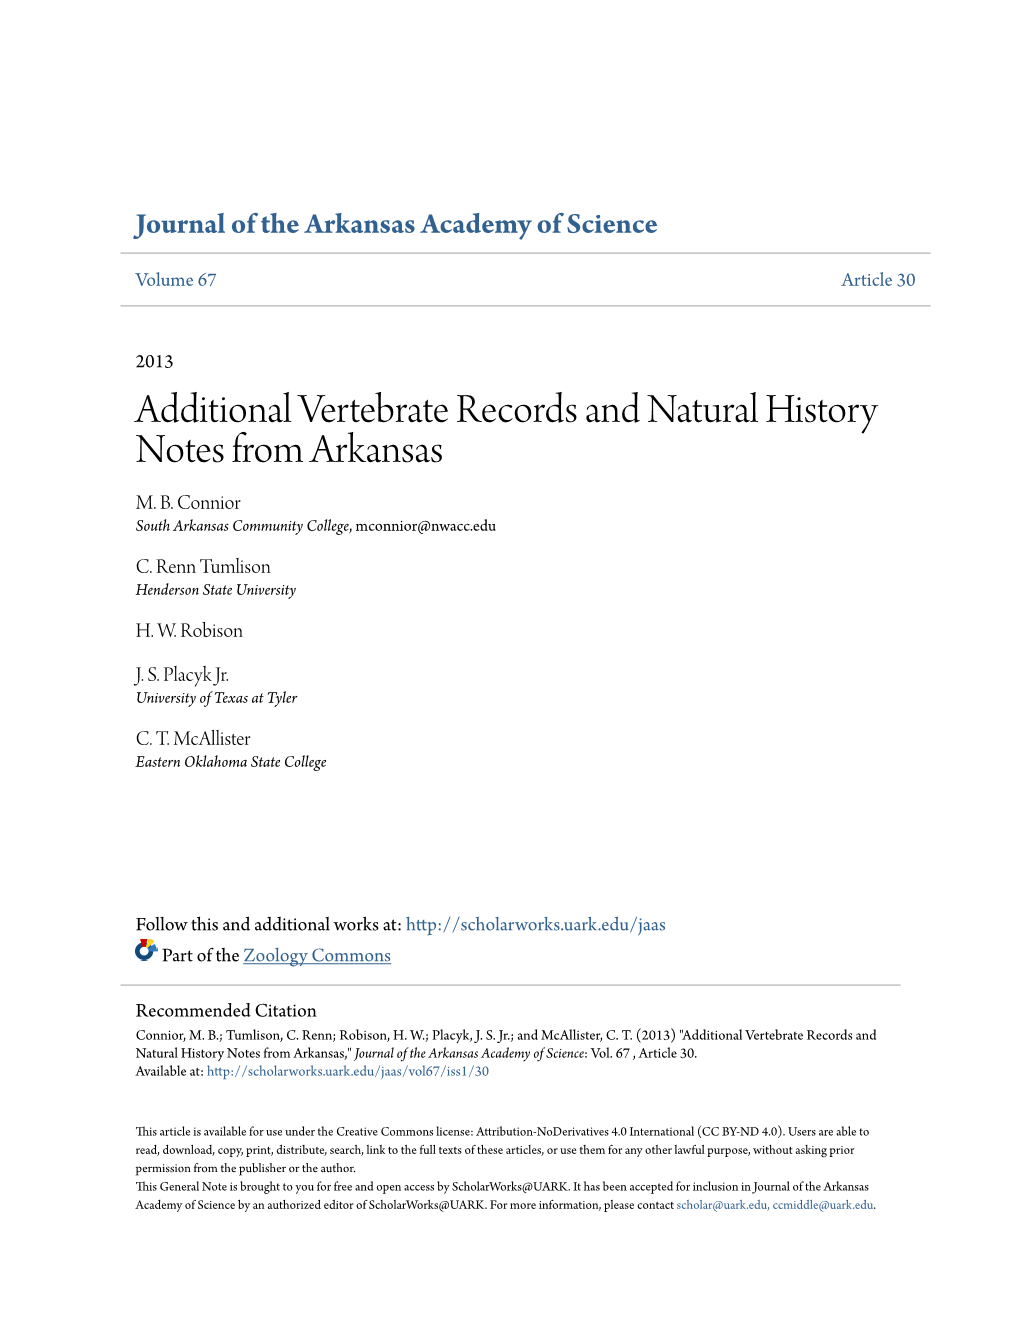 Additional Vertebrate Records and Natural History Notes from Arkansas M